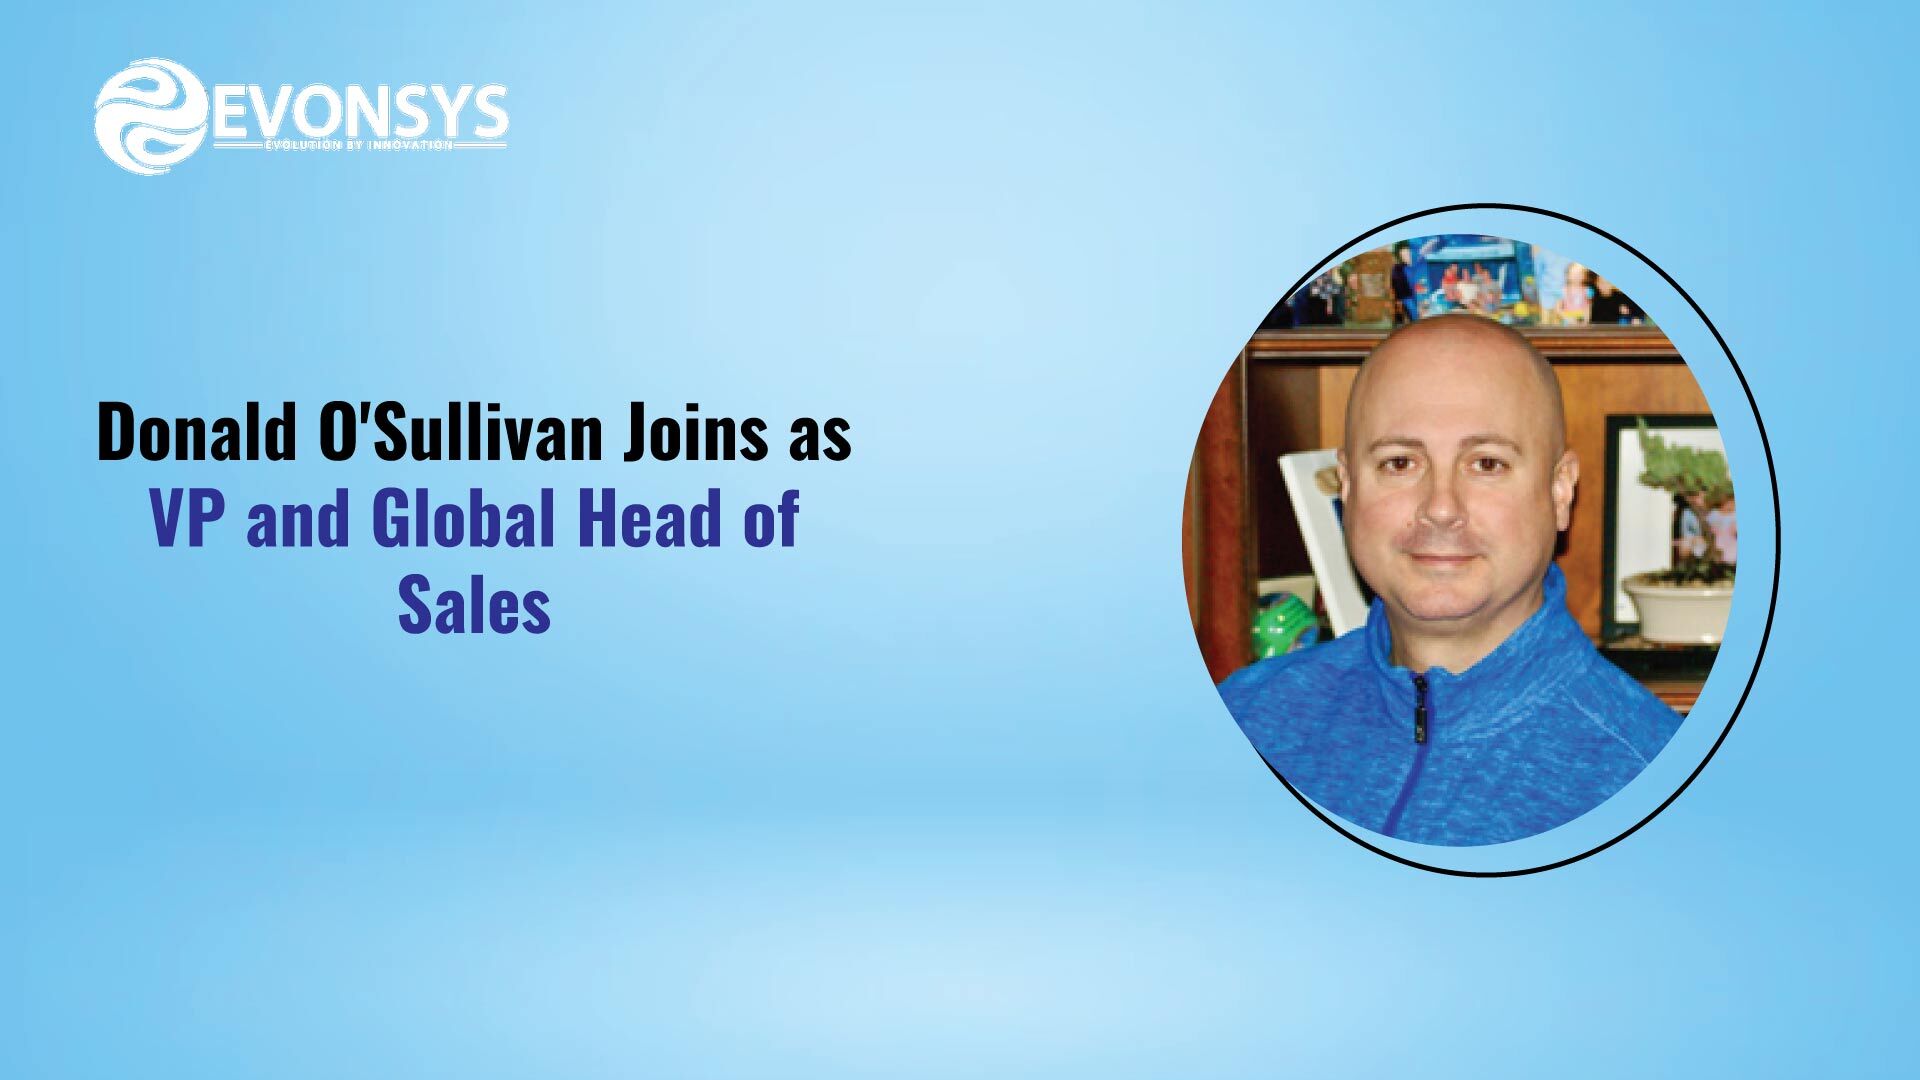 Donald O'Sullivan Joins Evonsys as Vice President and Global Head of Sales